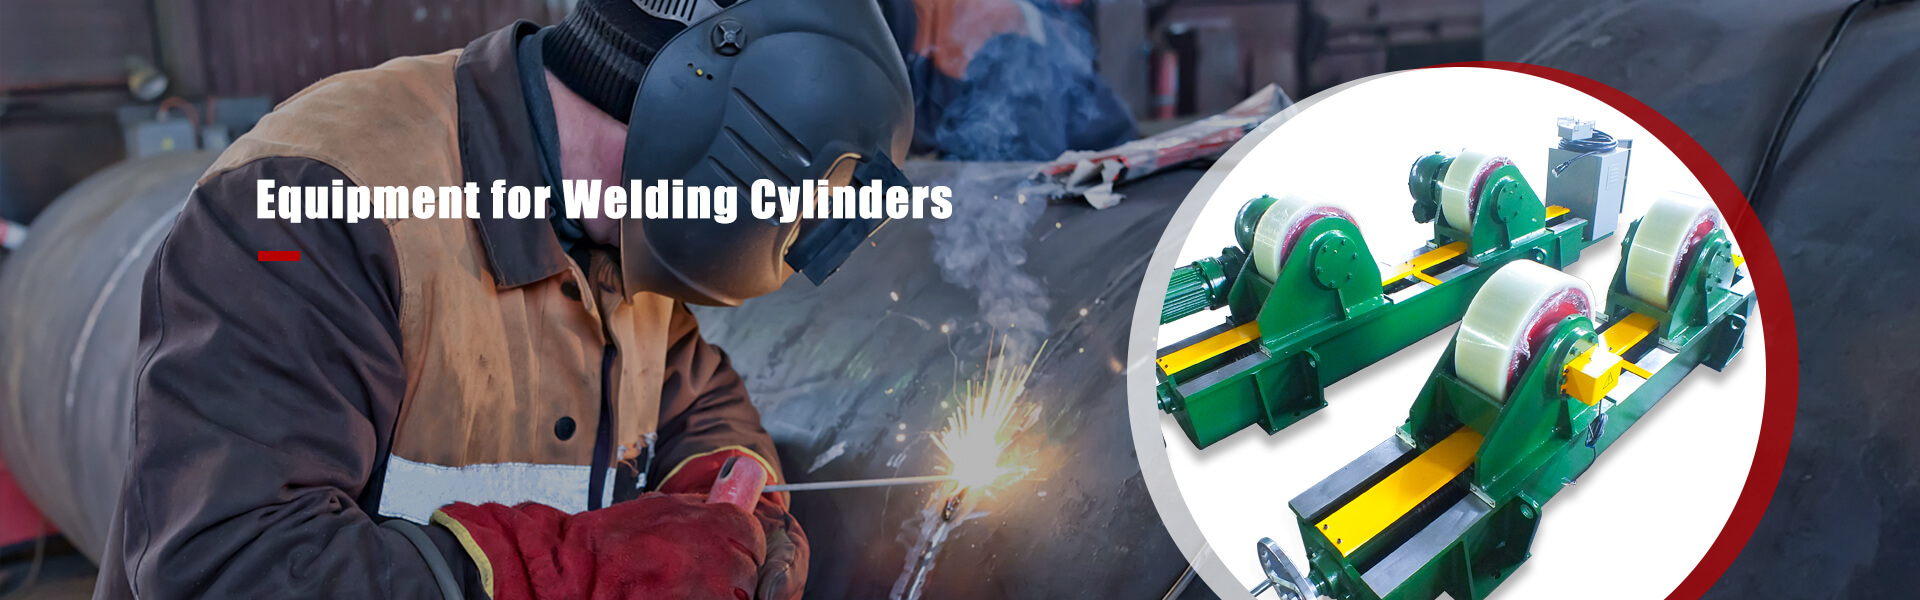 equipment for welding cylinders